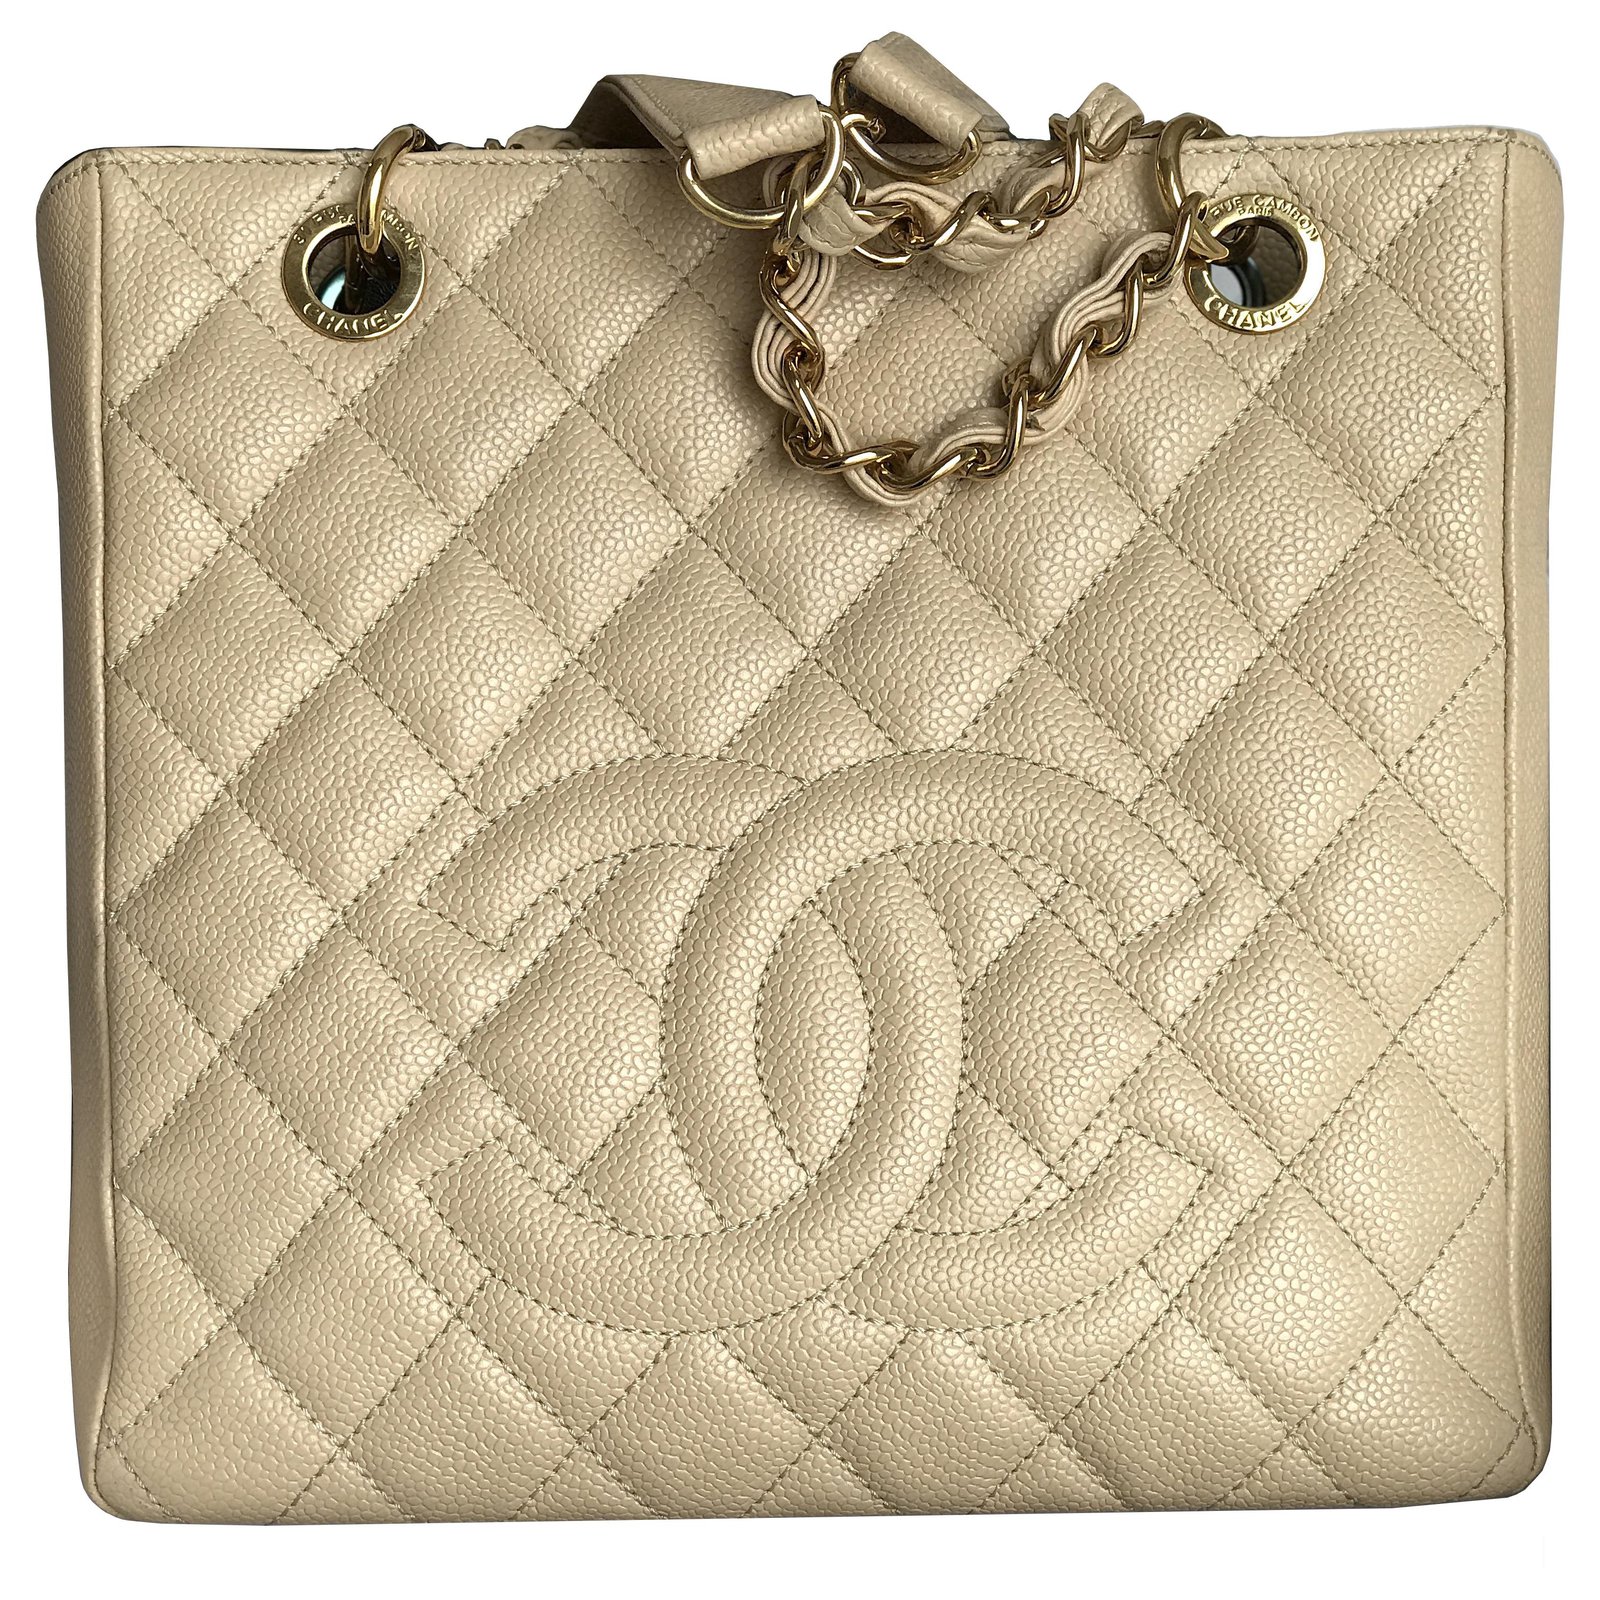 Chanel PST shopping caviar bag in great condition Beige Leather